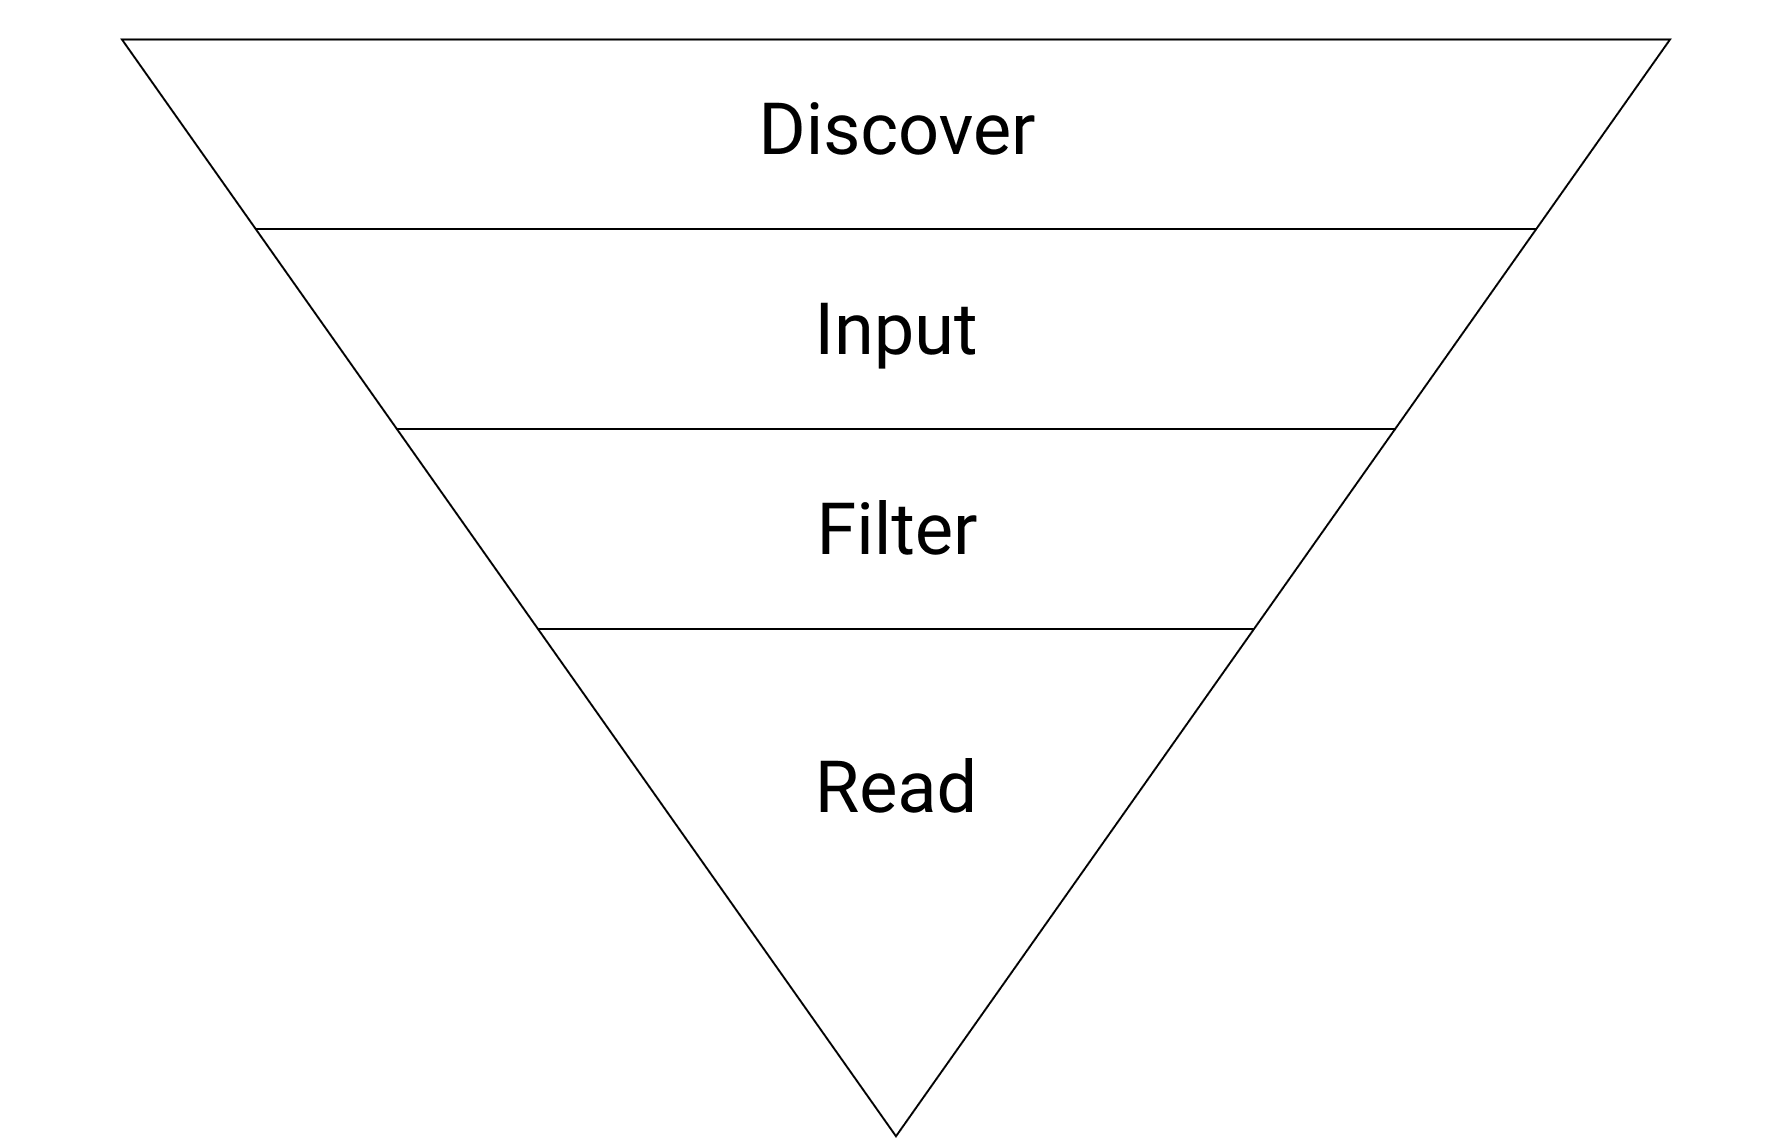 The Discover, Input, Filter, and Read process